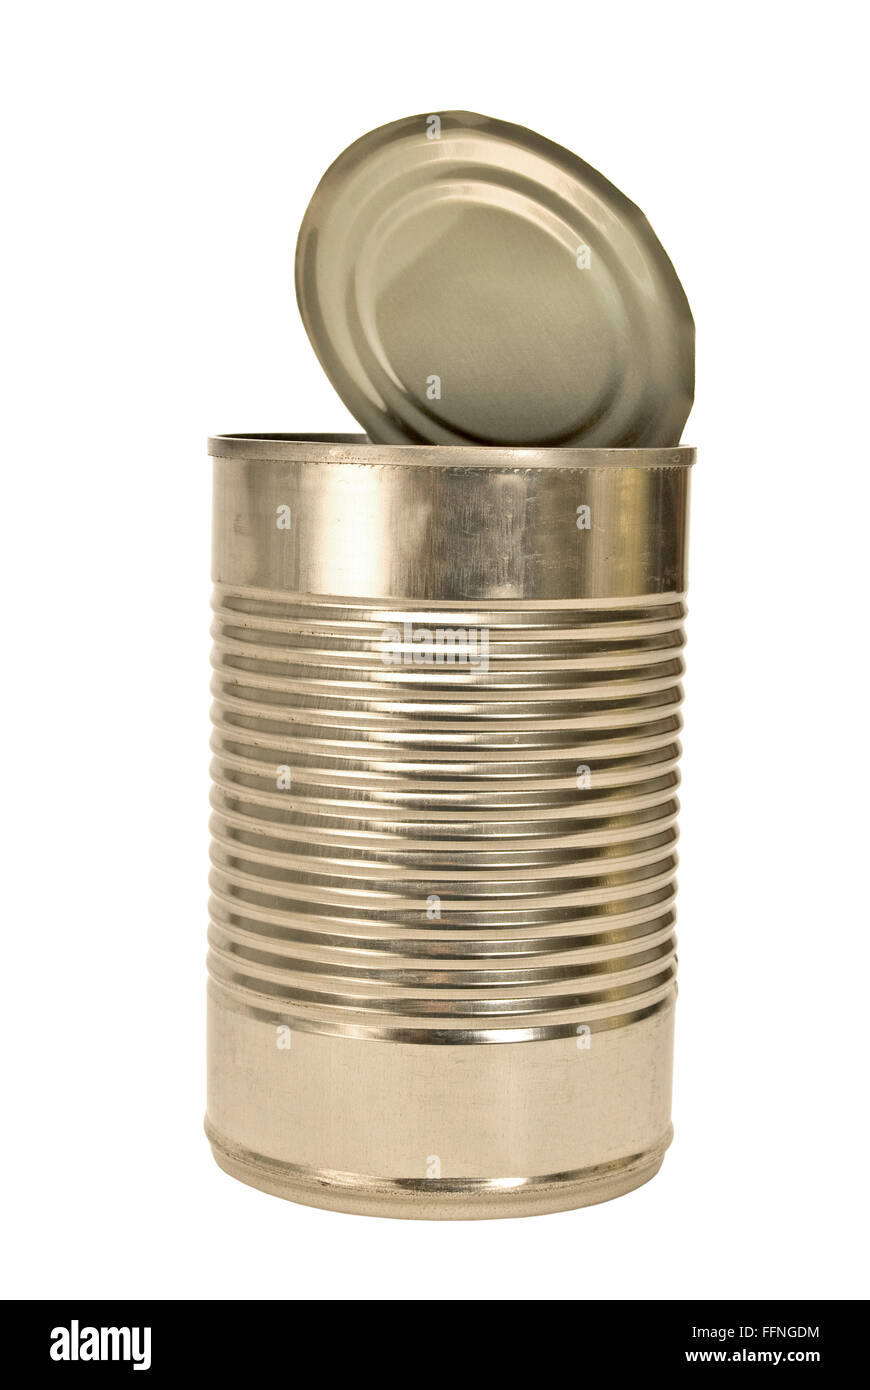 Silver Colored Open Metal Can Stock Photo